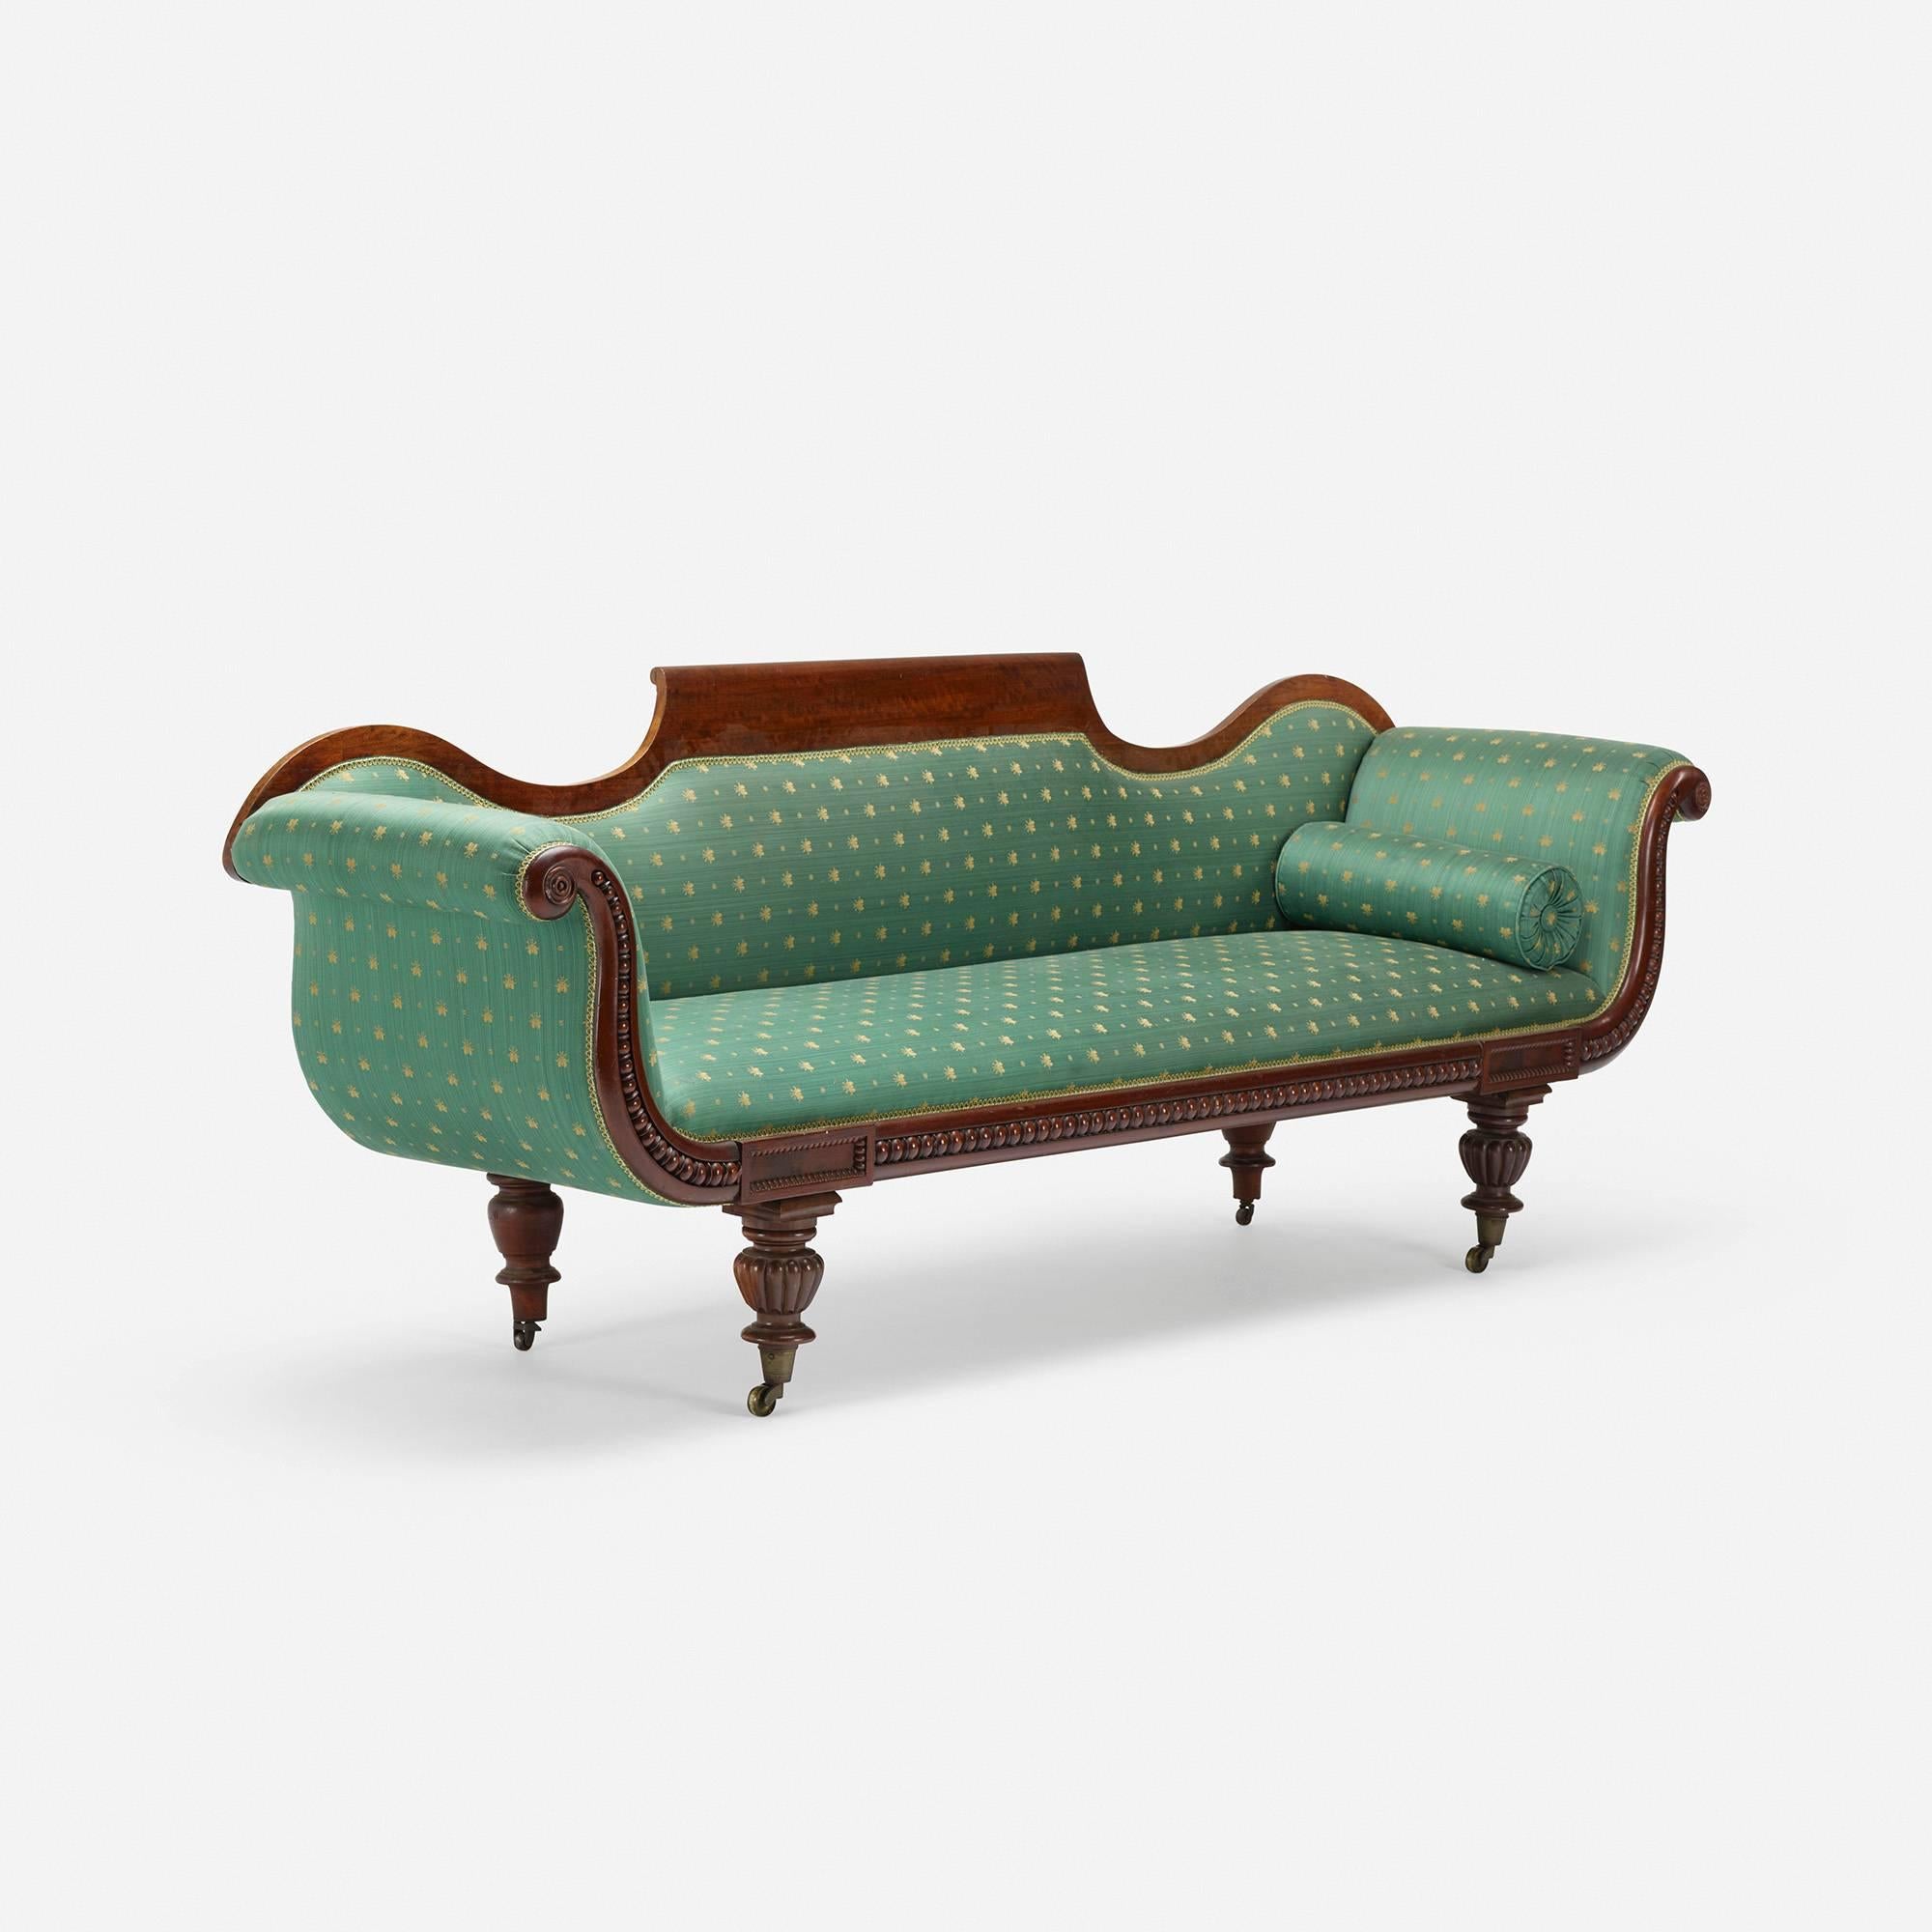 Curvaceous, stylish turned leg sofa from the 19th century.